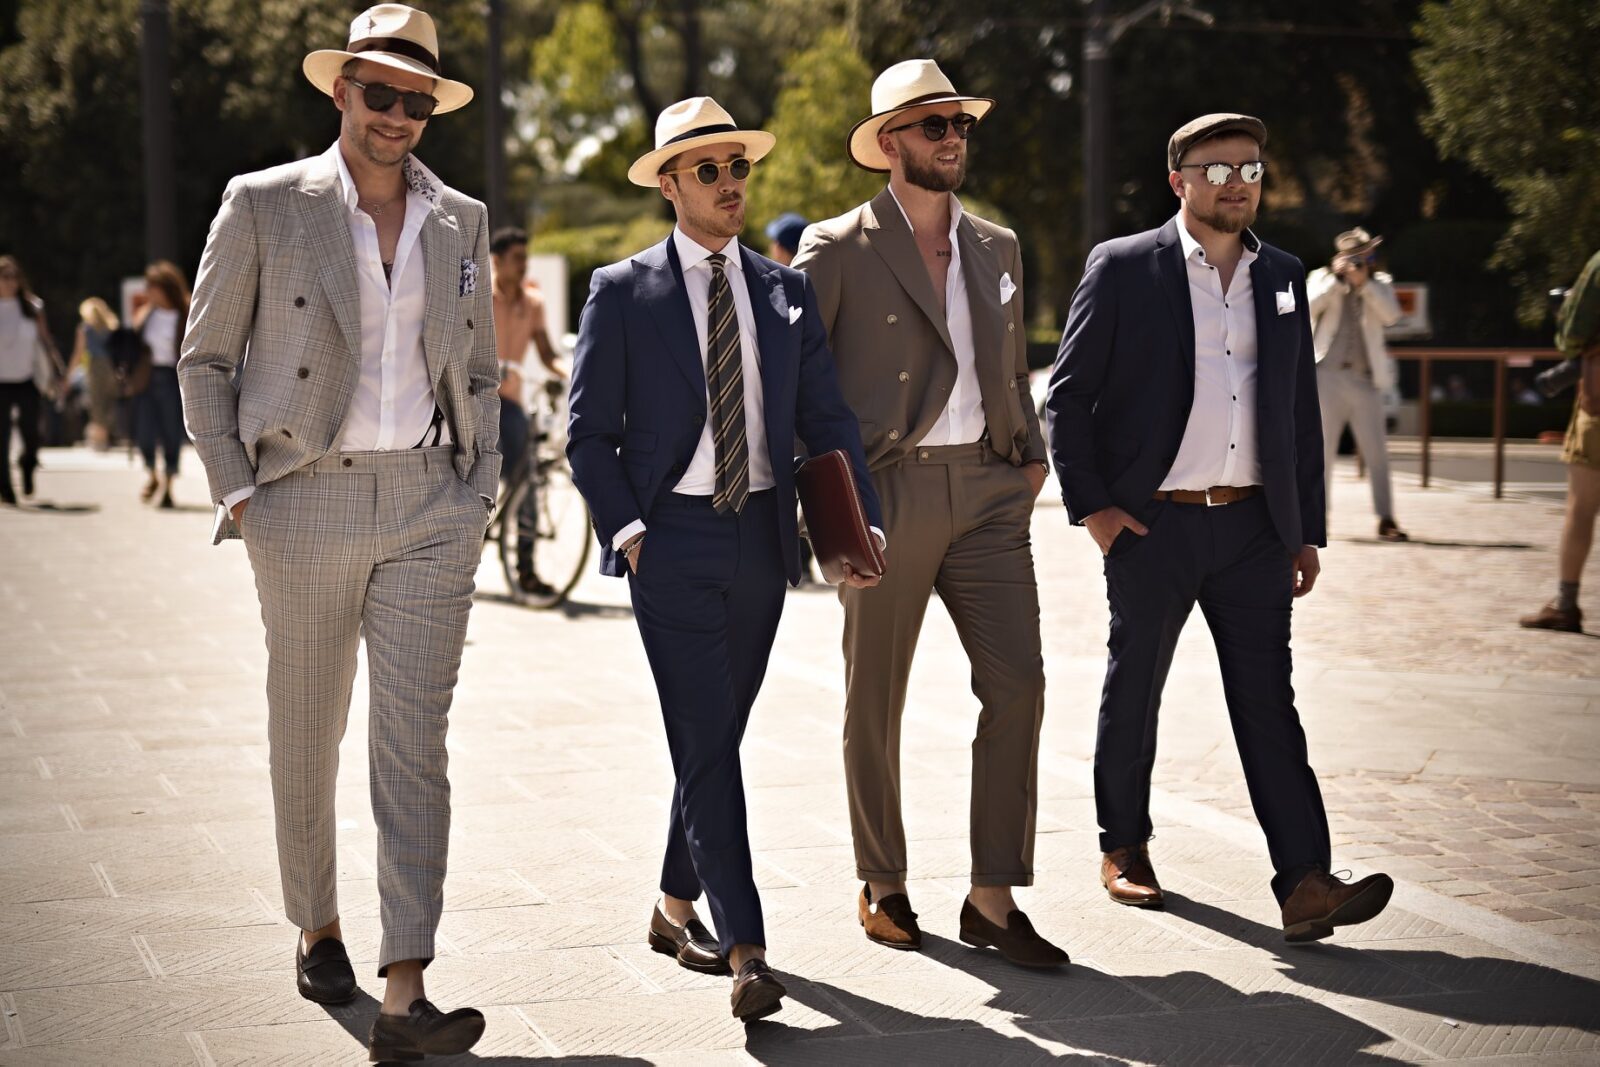 The Best Eyewear Street Style Looks Spotted at Pitti Uomo’s Spring 2019